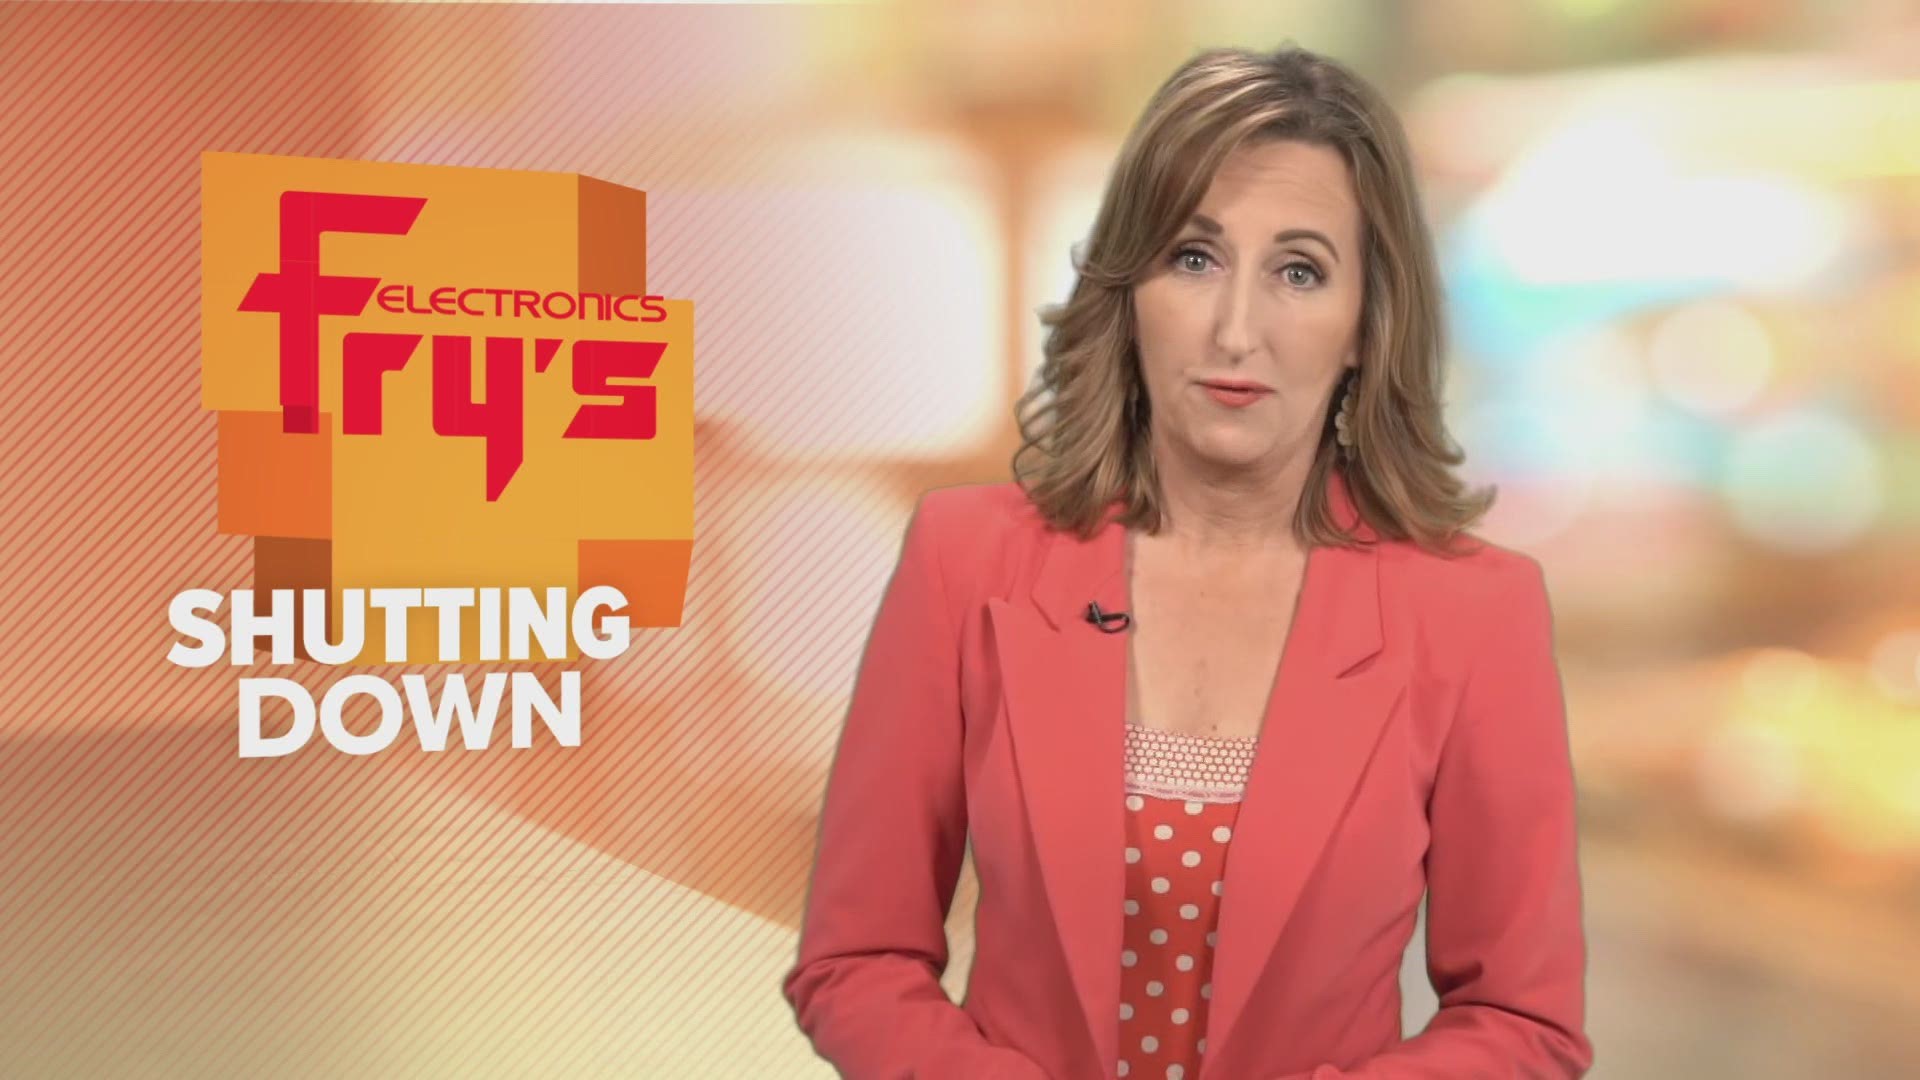 #HTownRush has a look at some of the morning's top consumer and business headlines